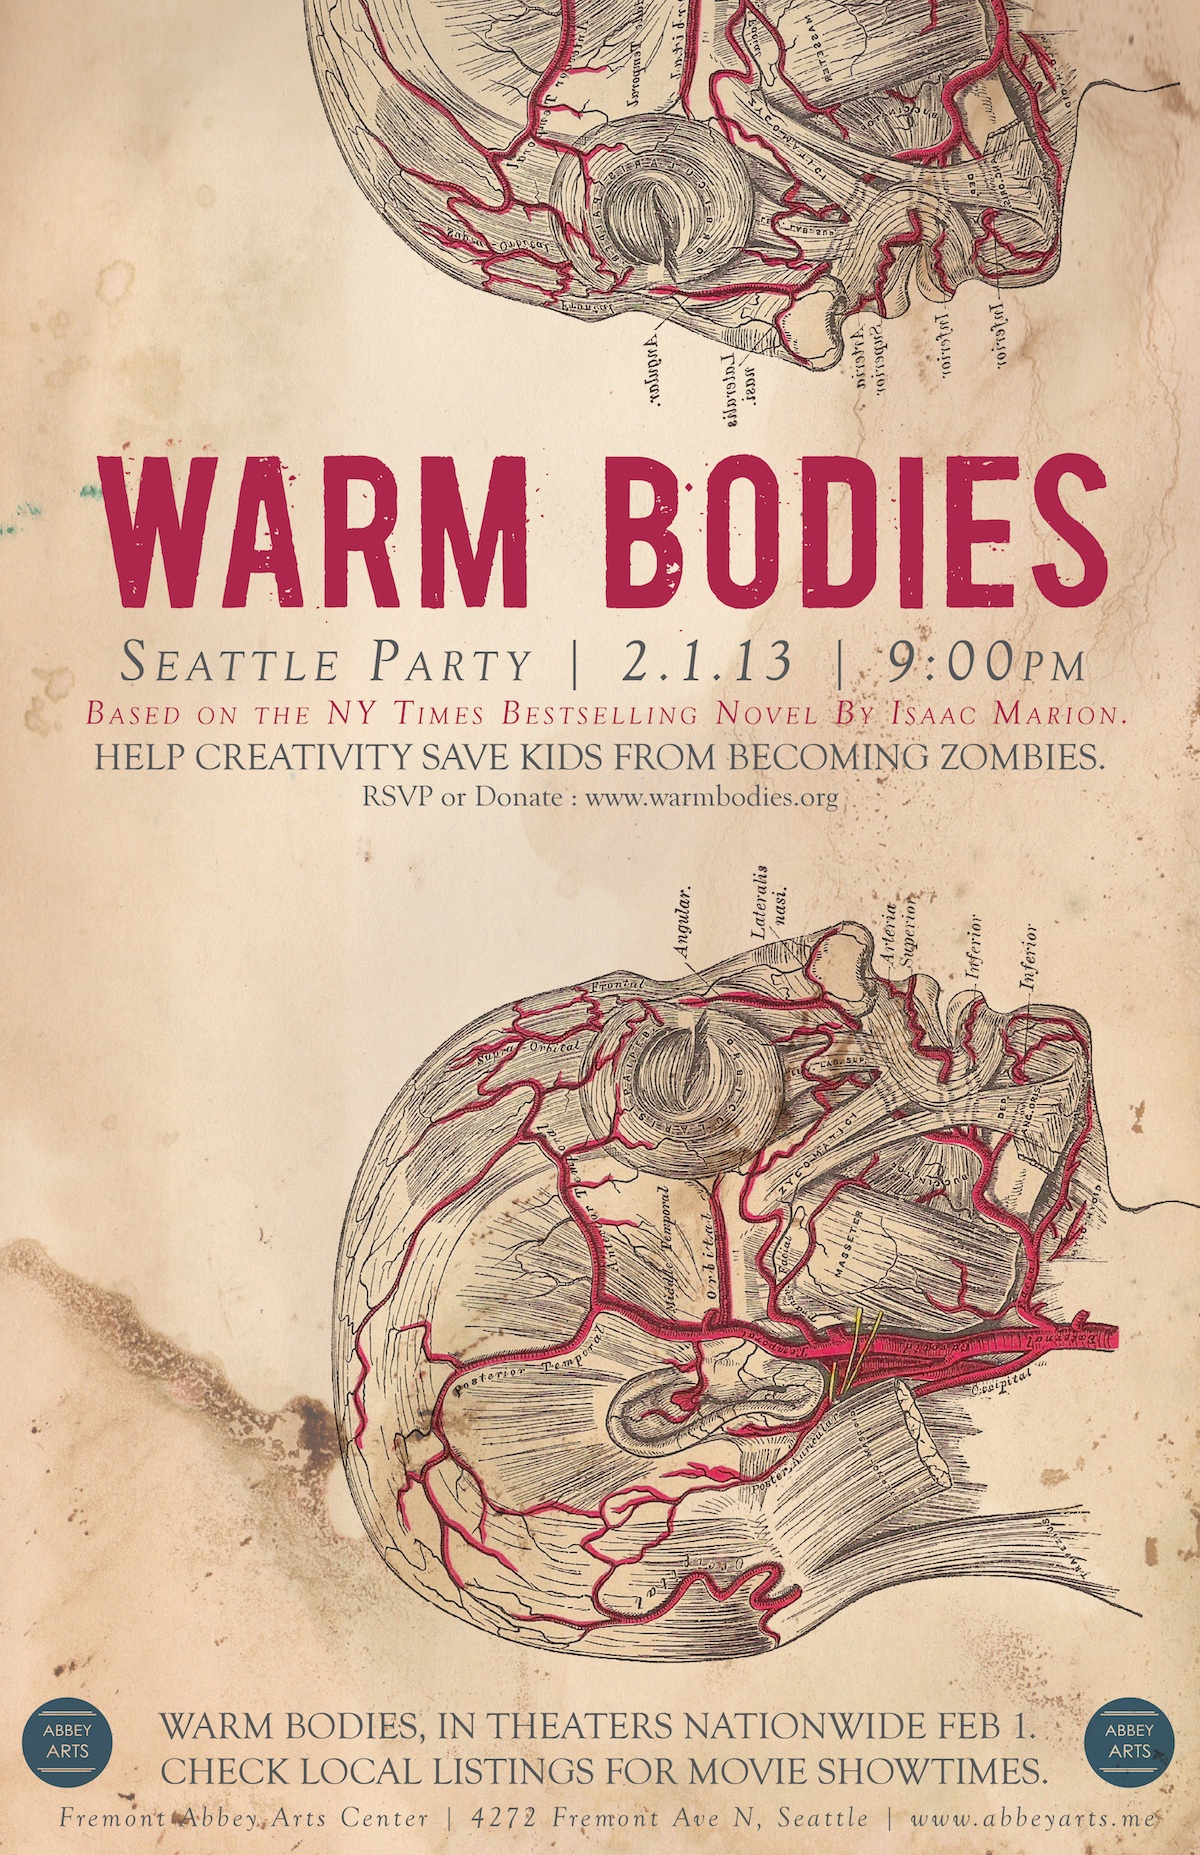 warm bodies book cover